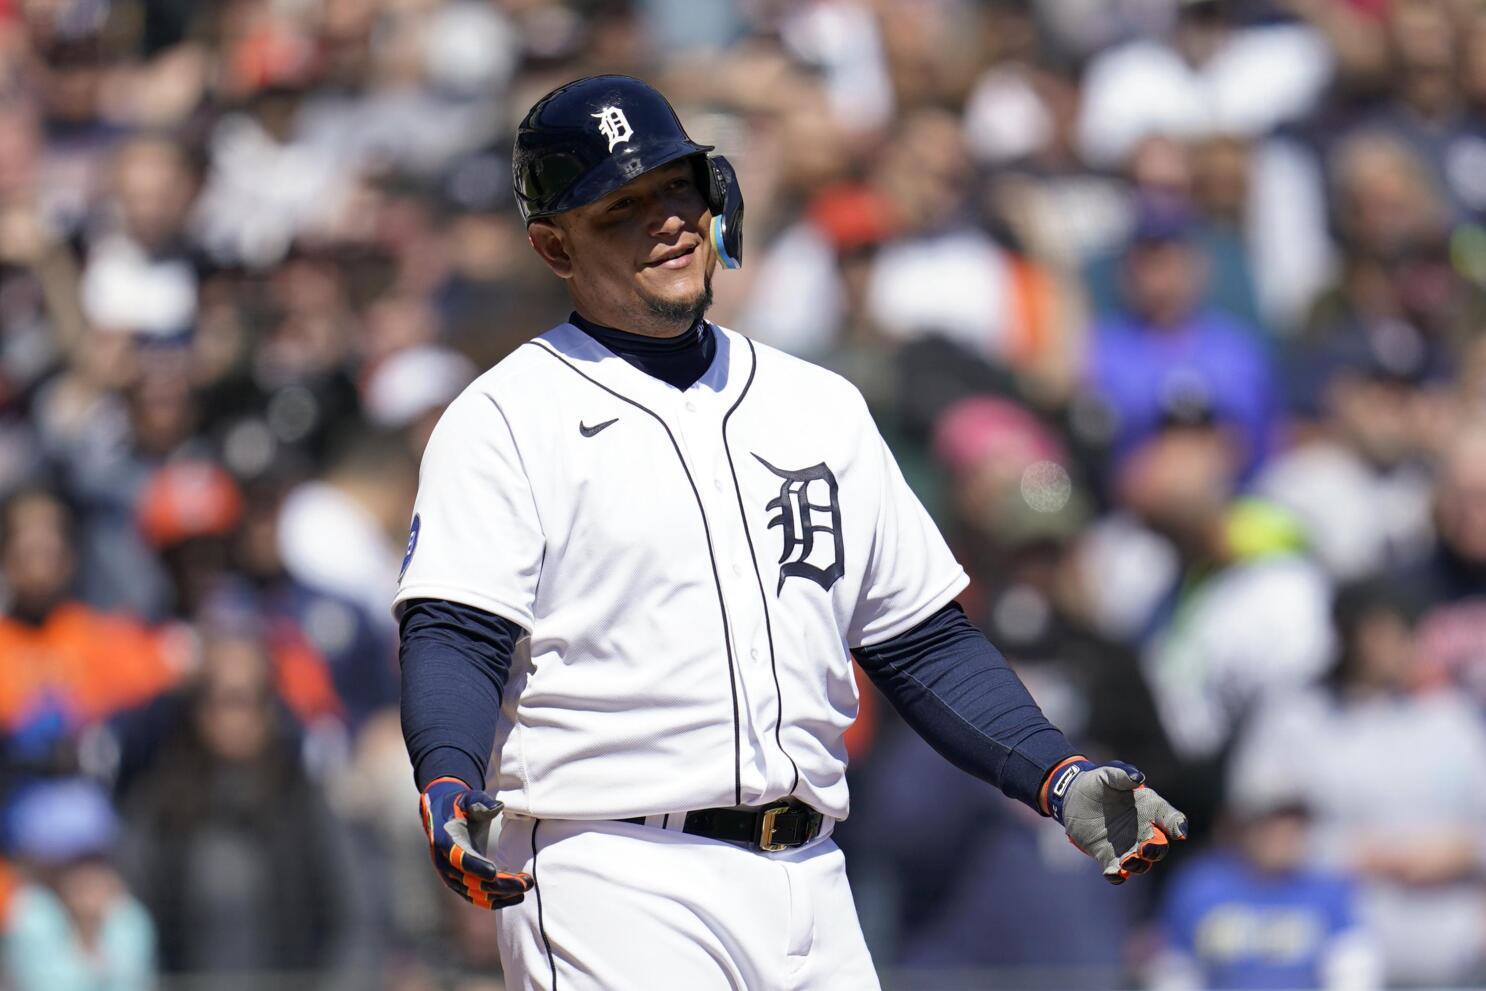 Miguel Cabrera retirement: Tigers star to stay in Detroit as front